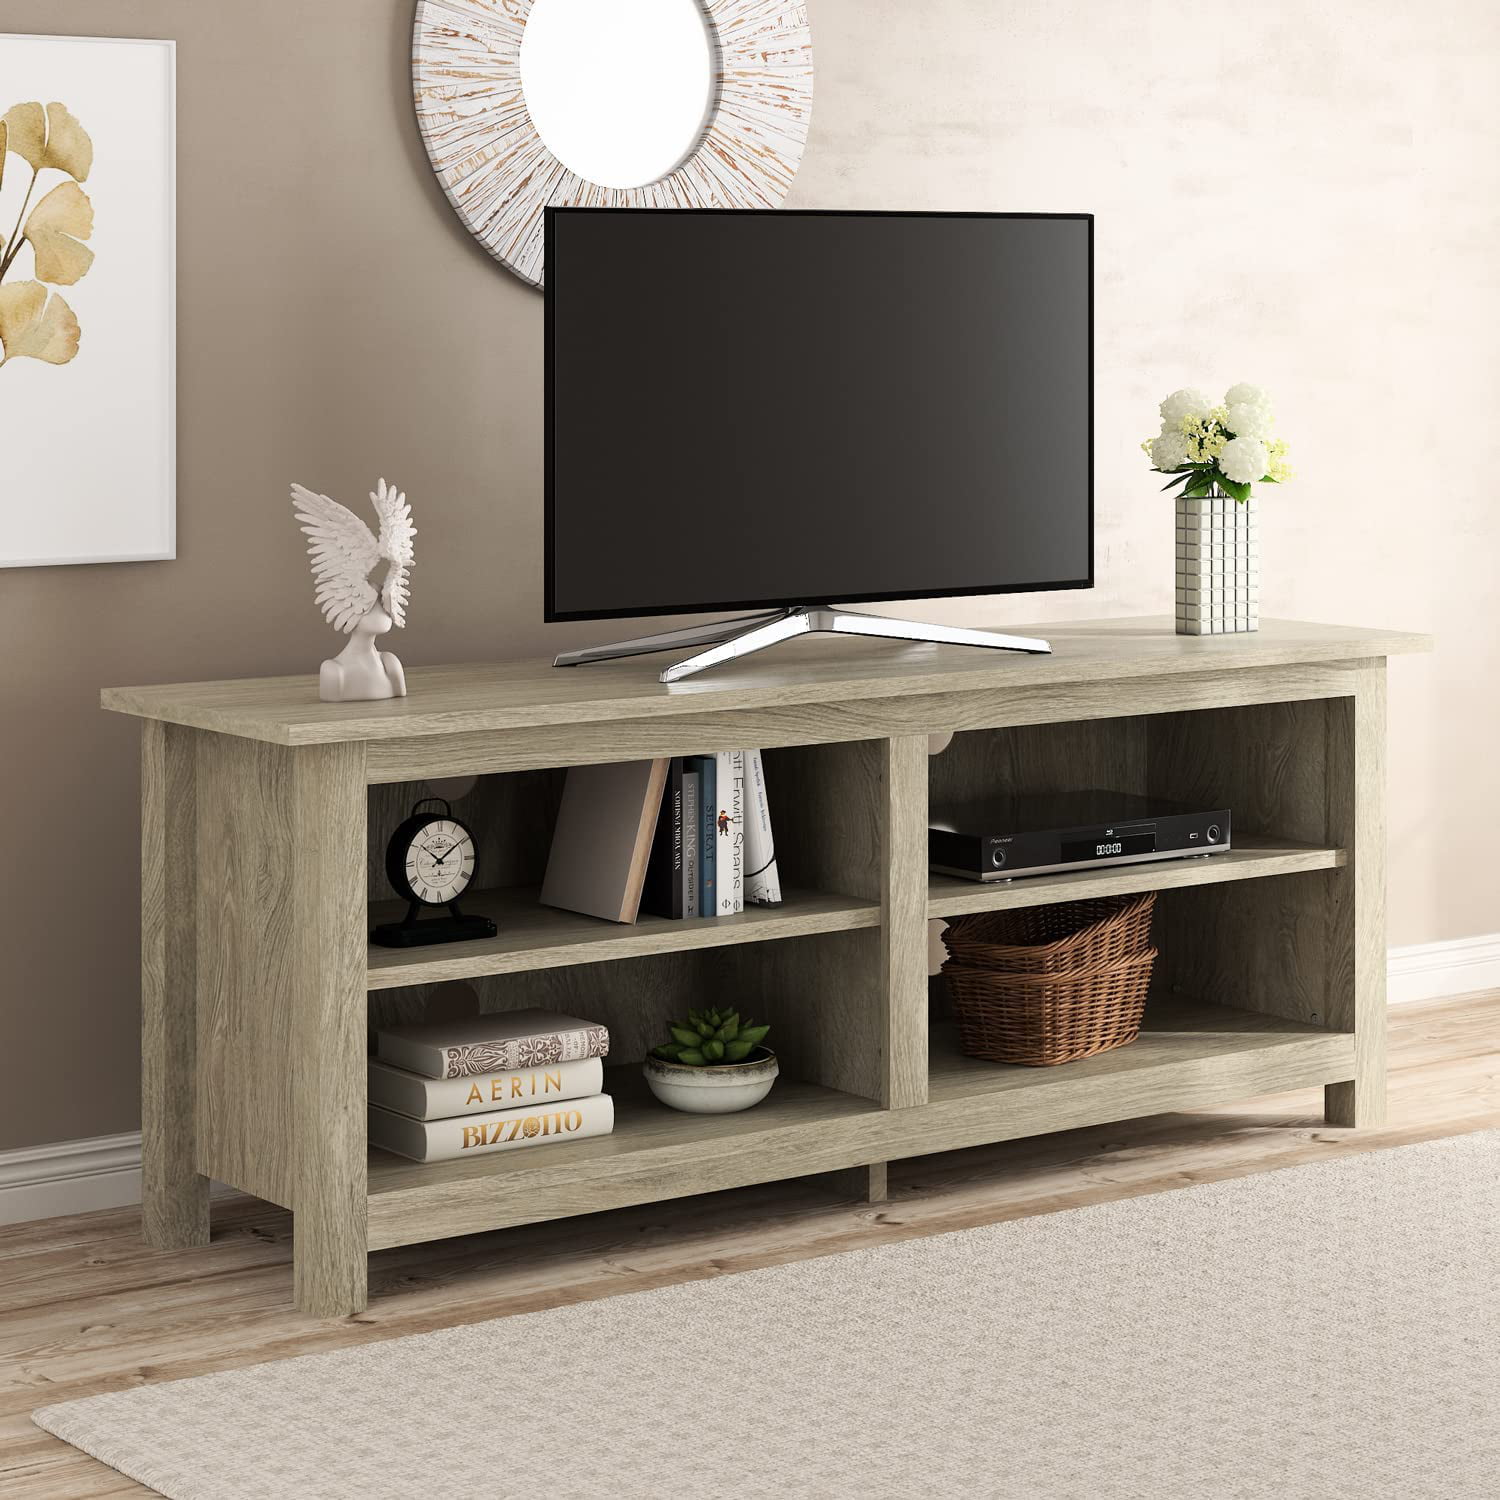 Espresso Allewie Farmhouse TV Stand Living Room Entertainment Stand TV Console for TVs Up to 65 with 3-Tier Adjustable Shelves 58 Entertainment Center with Storage Cabinet Industrial 